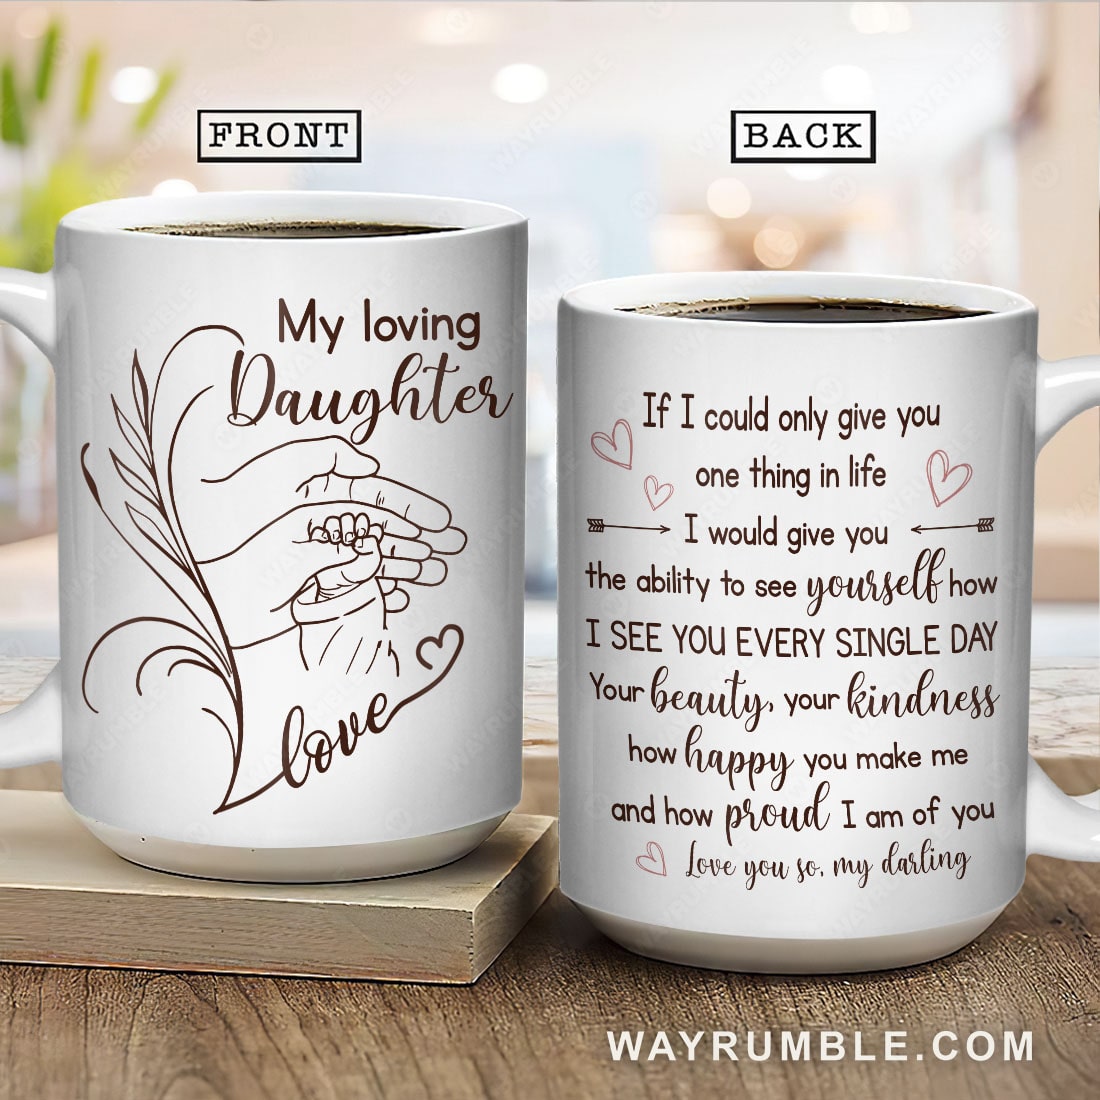 Mom to daughter, Hand in hand, Love symbol, I see you every single day - Family White Mug